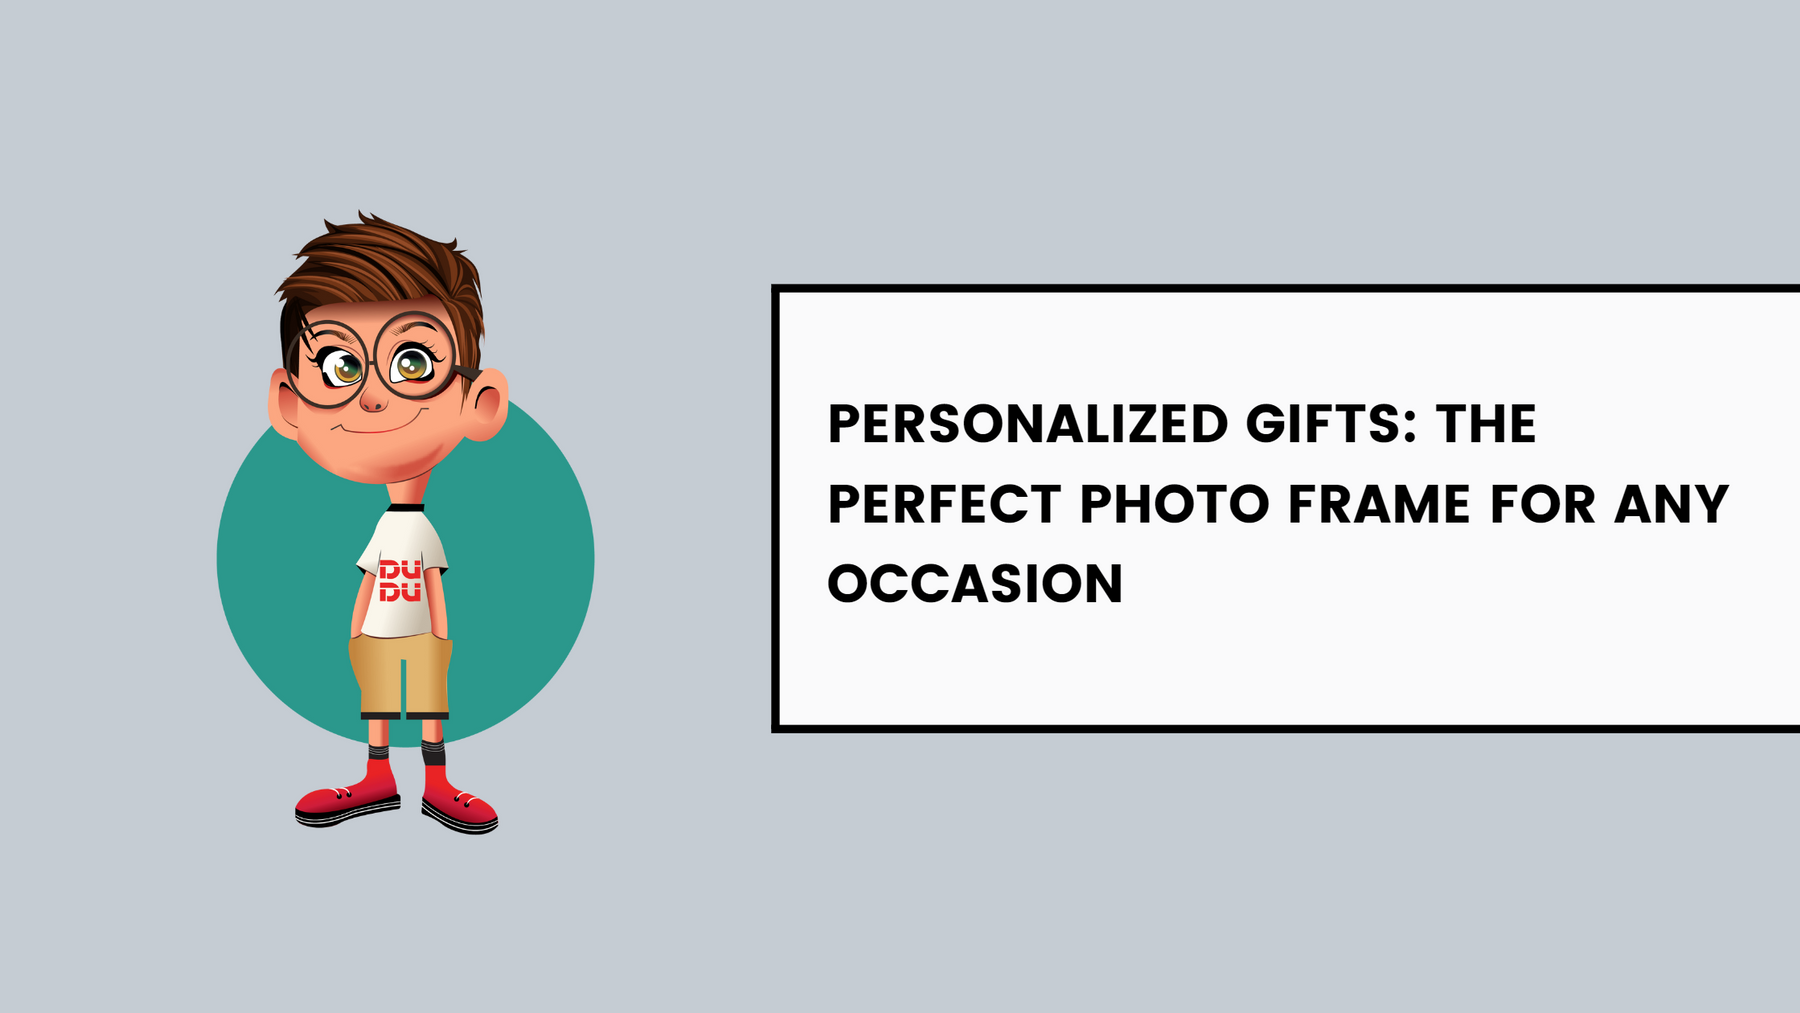 Personalized Gifts: The Perfect Photo Frame for Any Occasion